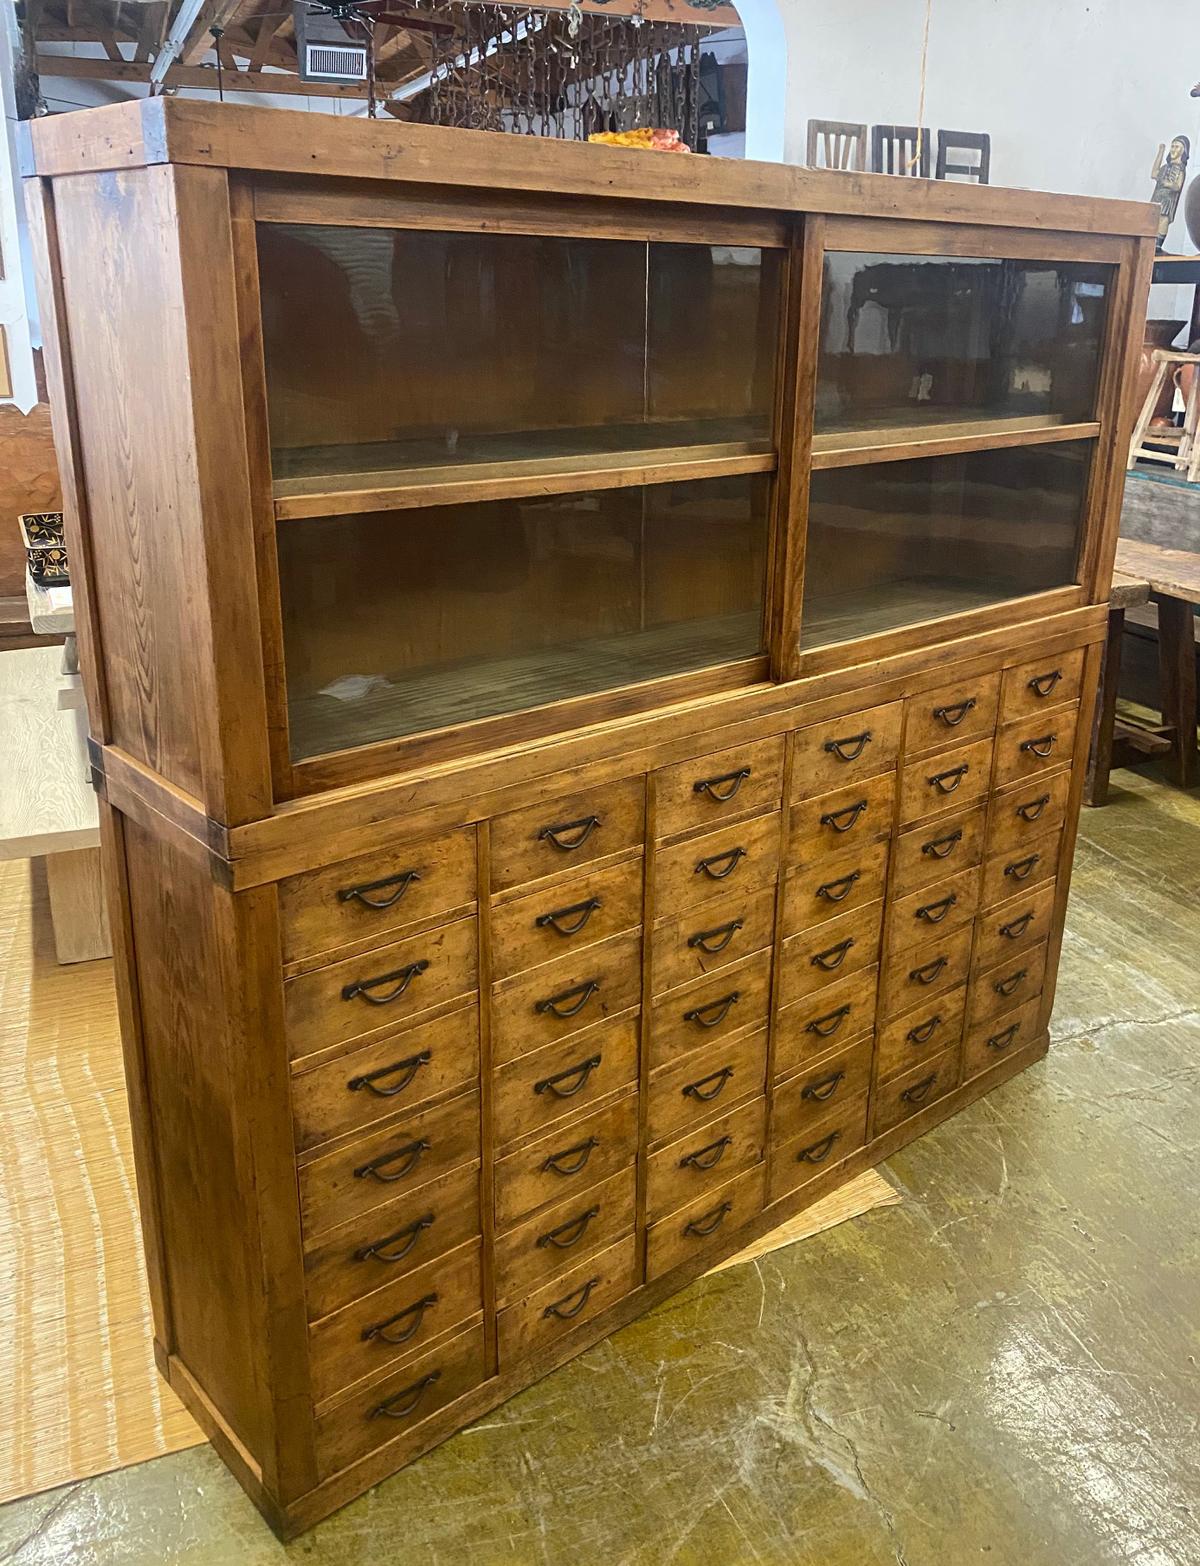 Early 20th Century Shop Chest with Sliding Glass Door Atop 42 Drawers 5